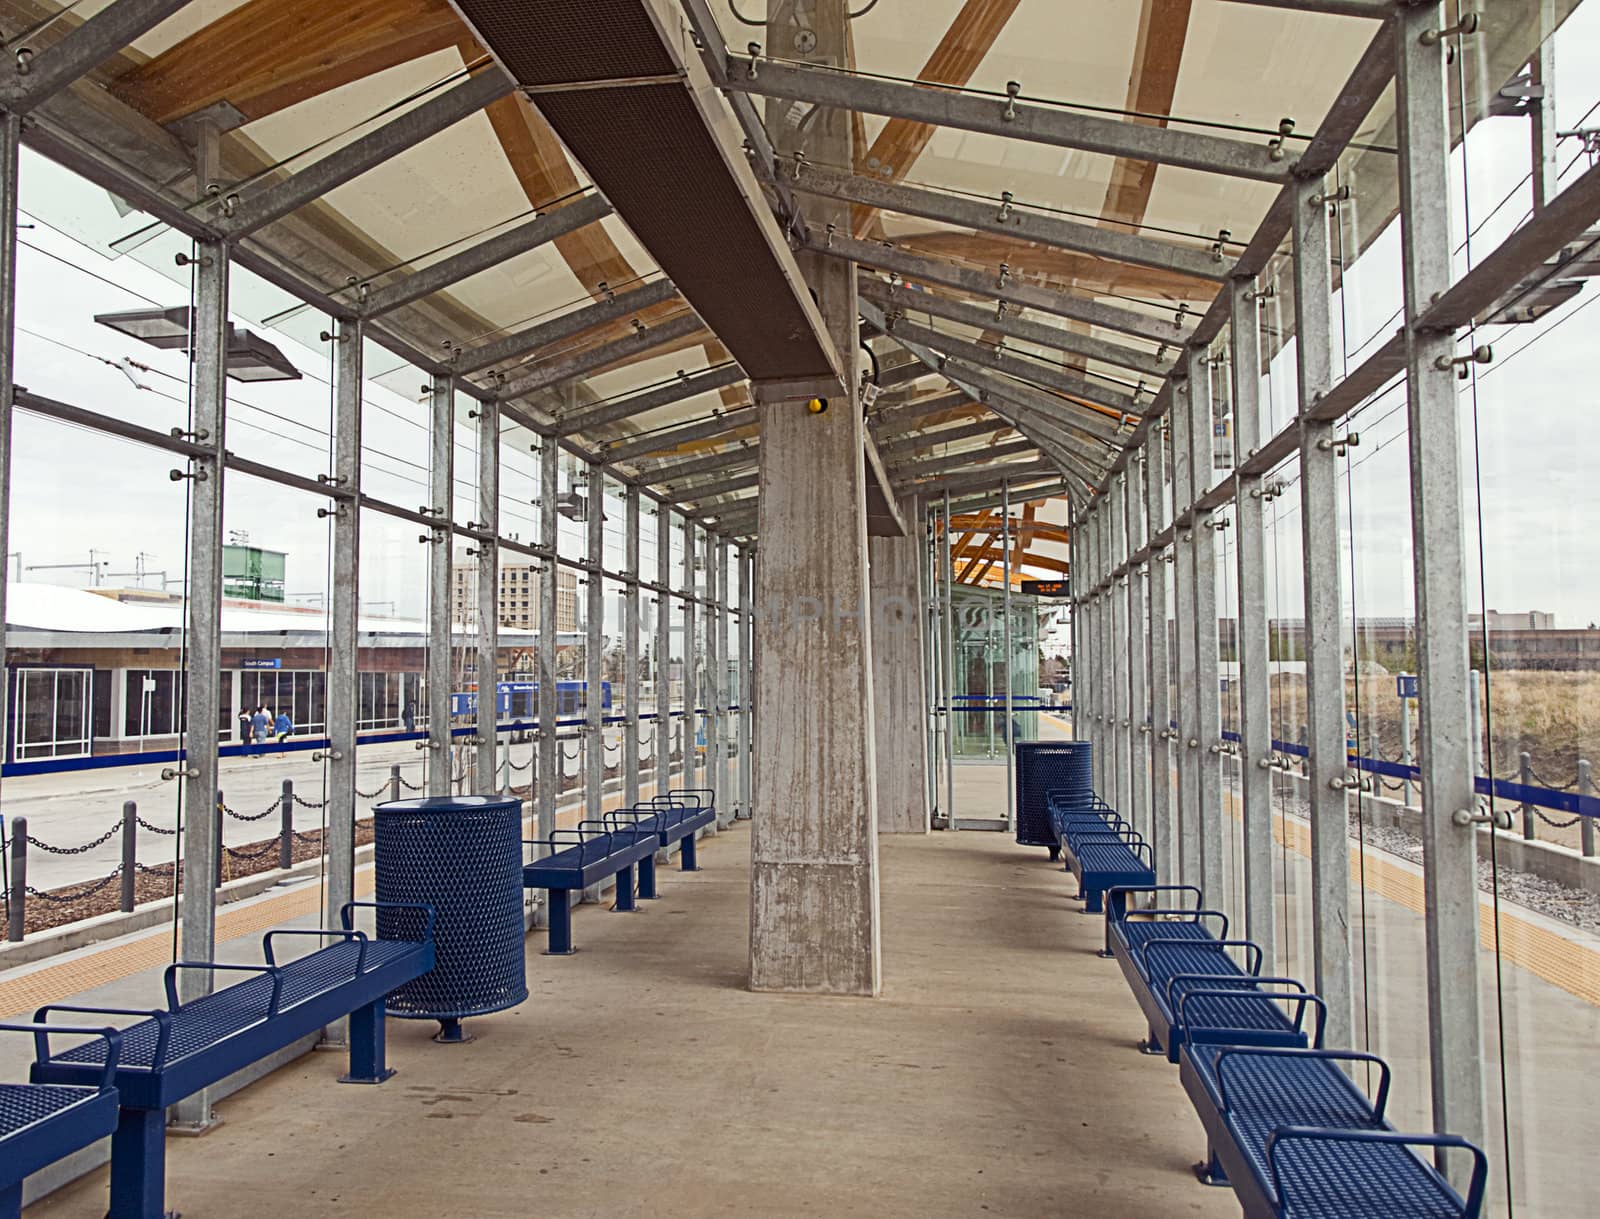 Interior of the recently constructed South Campus Station in Edmonton, Alberta, Canada.